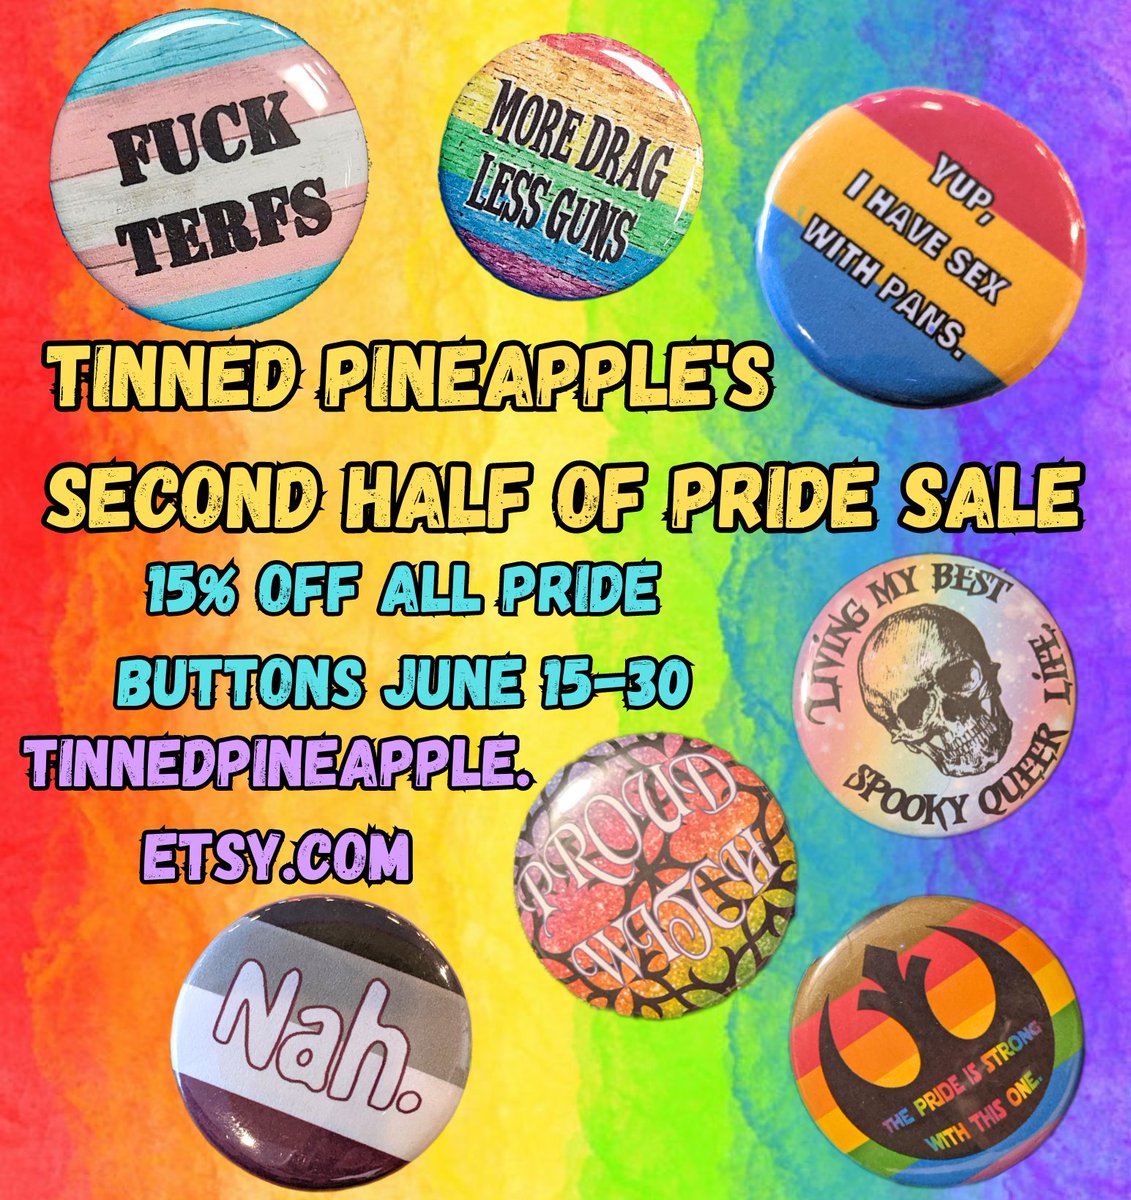 Can you believe Pride month is half over? Starting tonight at midnight all Pride pins in my shop will be 15% off! This includes #OFMD !
tinnedpineapple.etsy.com
#lgbt #pridemonth #queerpride #shophandmade #supportsmallbusiness #gaypride #transpride #panpride #acepride #fuckterfs